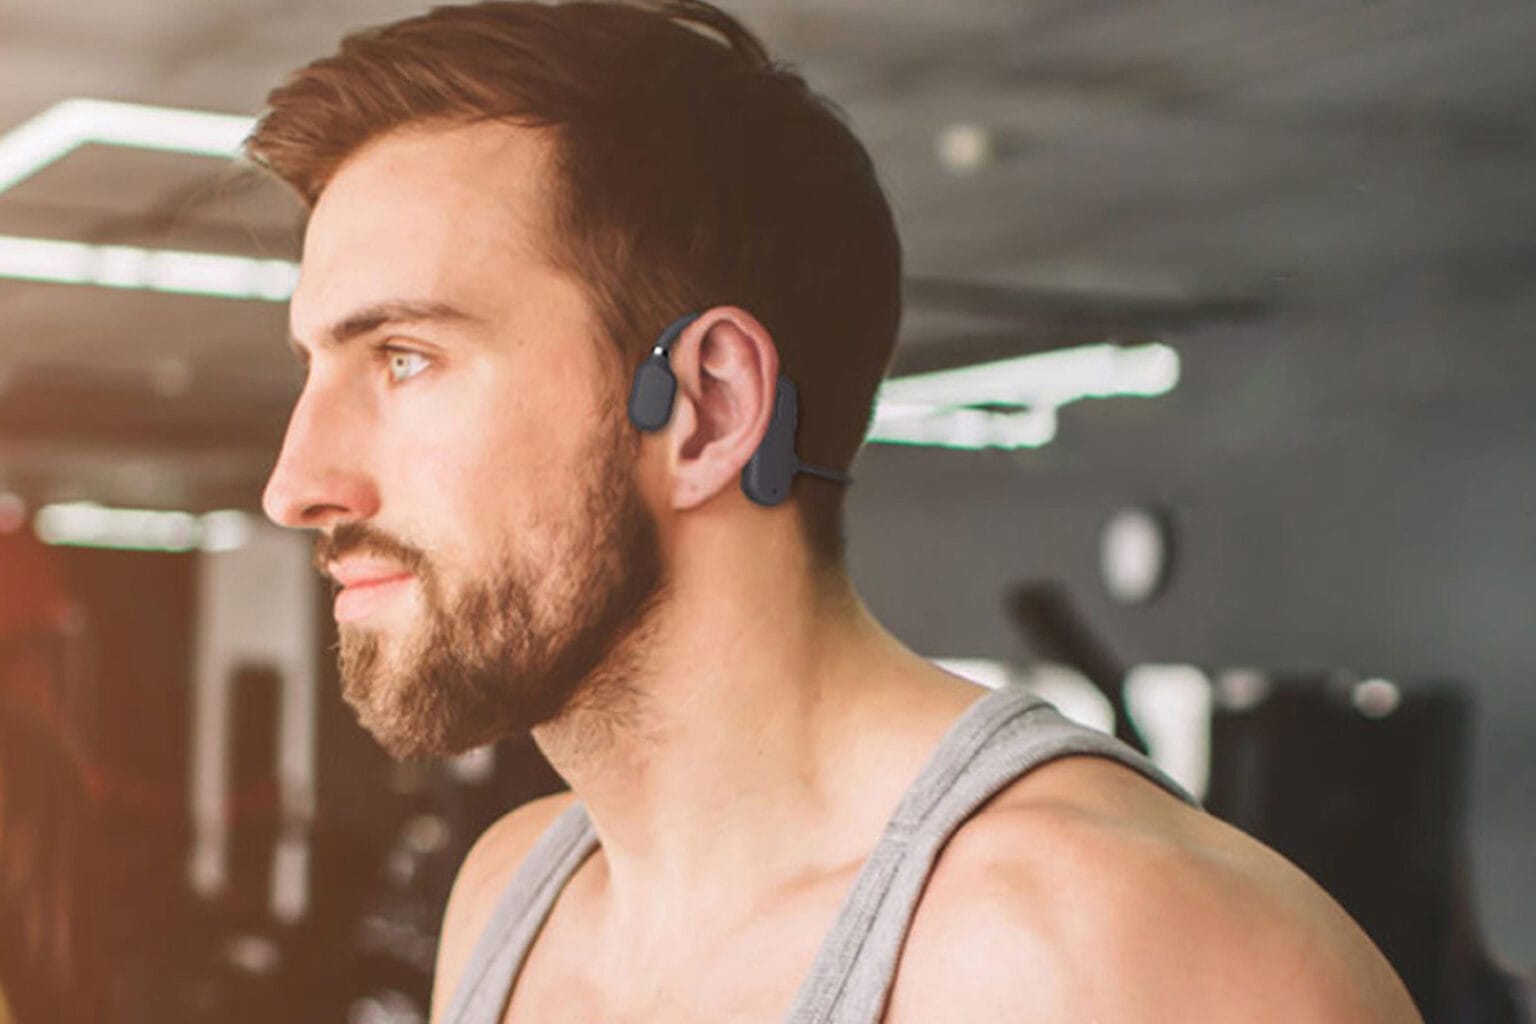 Keep your ears free with these $34 open-ear induction headphones.